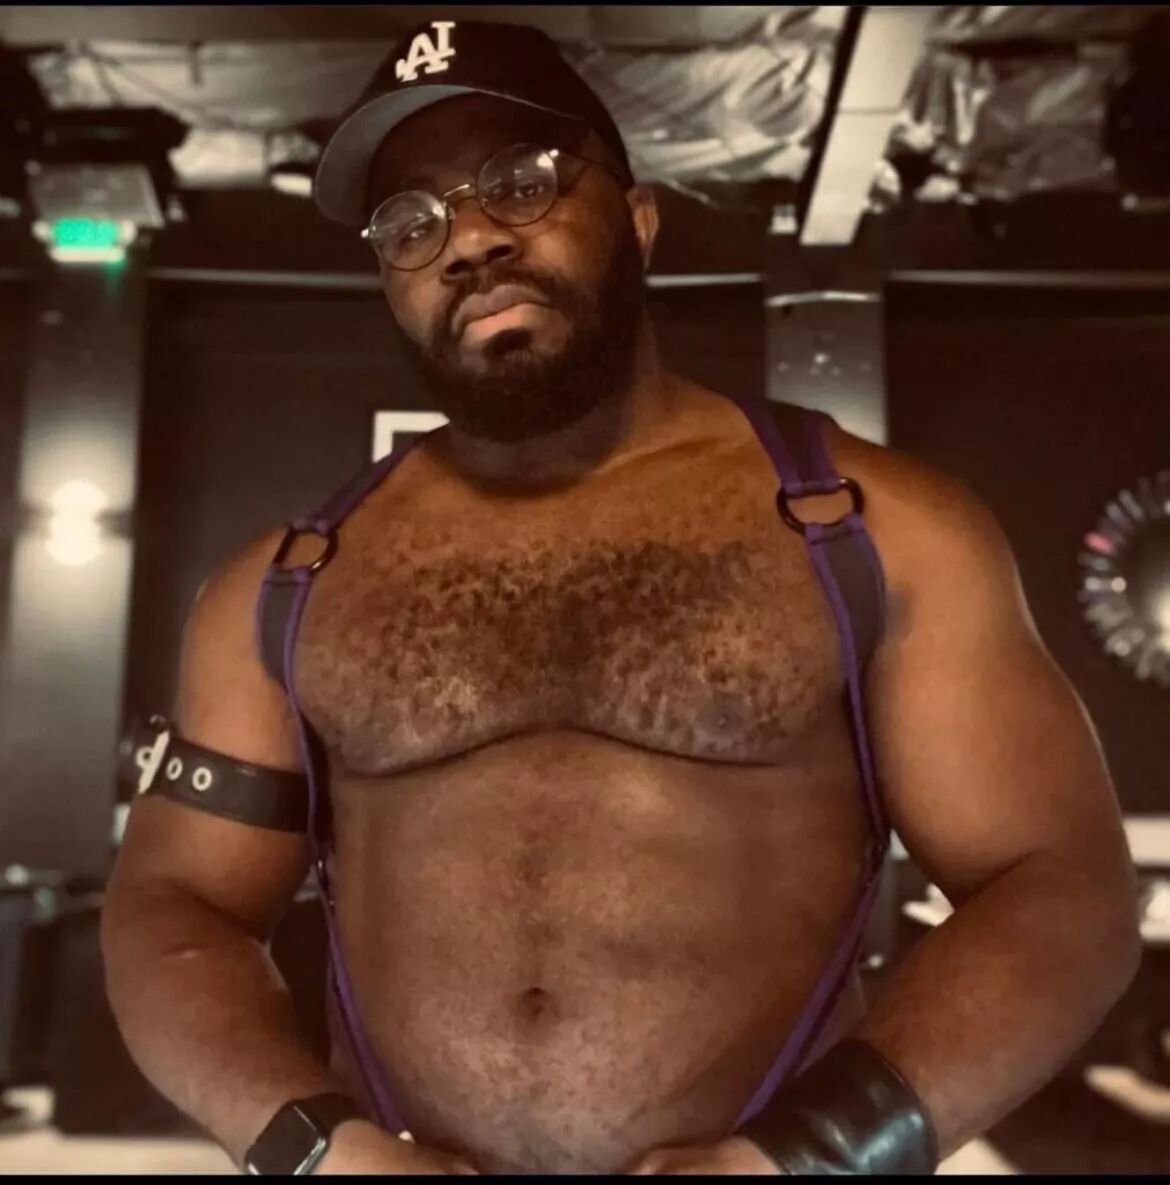 A hunky bear wearing a harness, baseball cap and round glasses